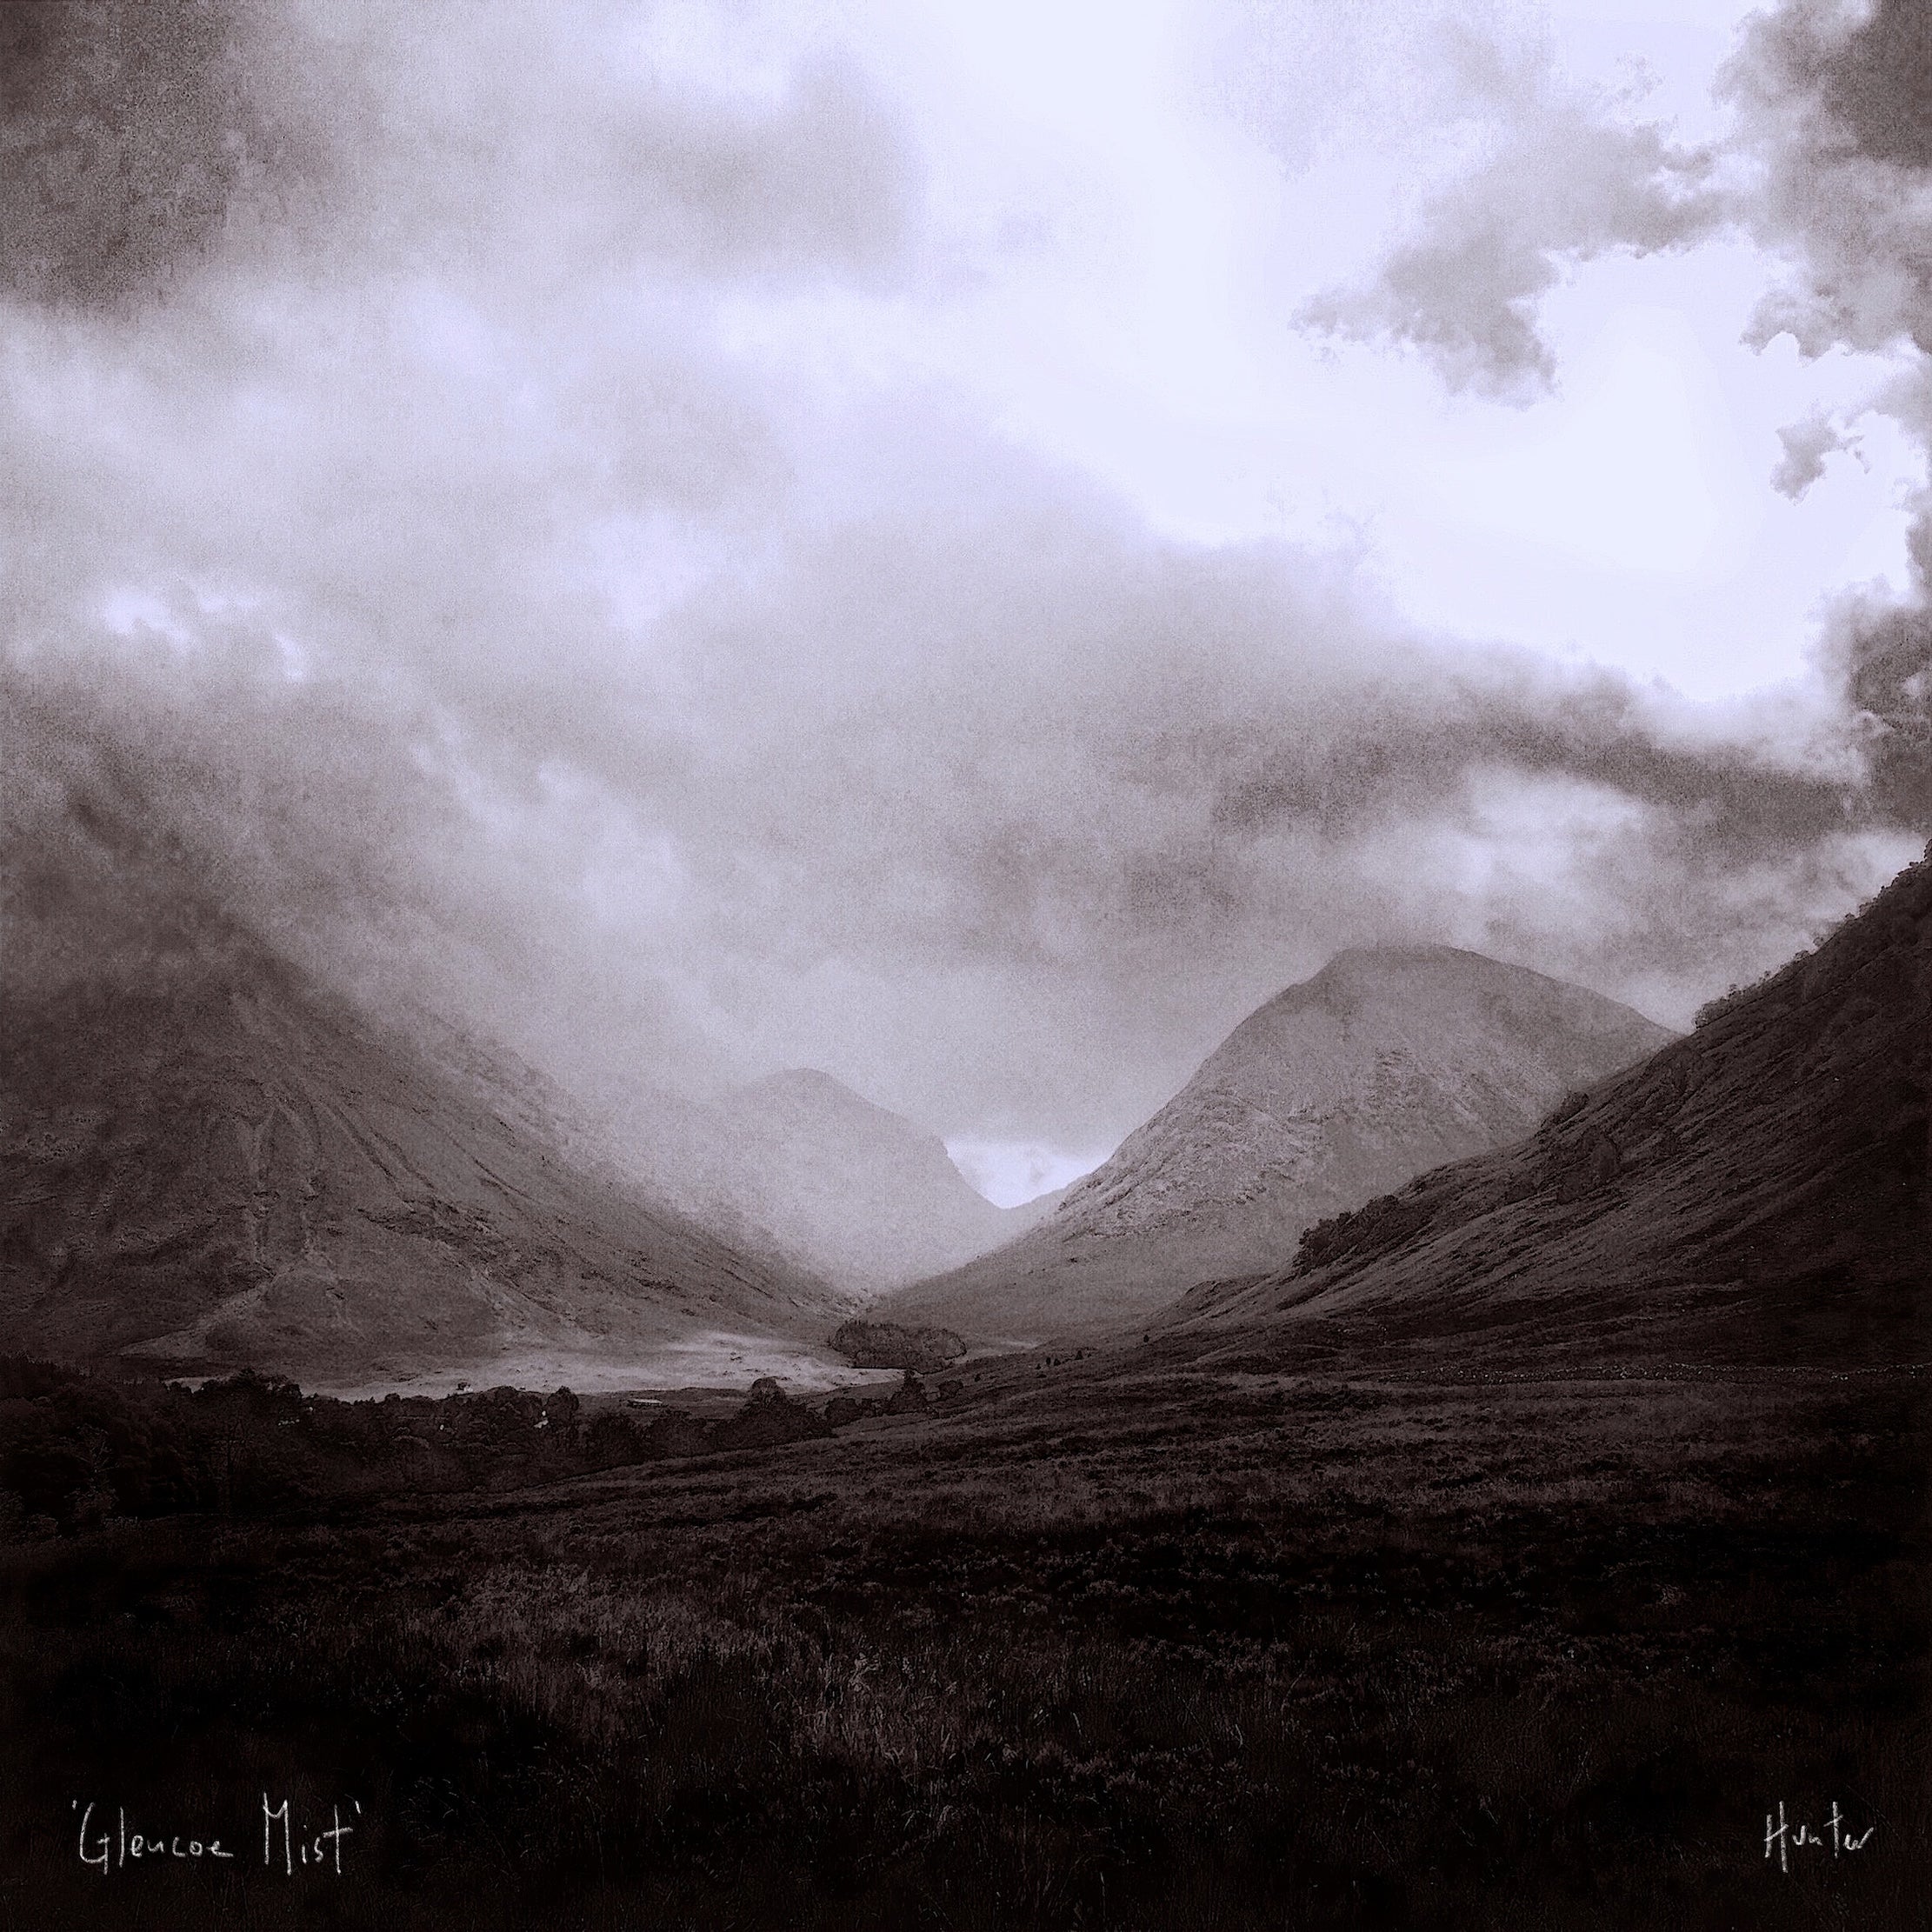 Glencoe Mist | Scotland In Your Pocket Art Print-Scotland In Your Pocket Framed Prints-Glencoe Art Gallery-Paintings, Prints, Homeware, Art Gifts From Scotland By Scottish Artist Kevin Hunter